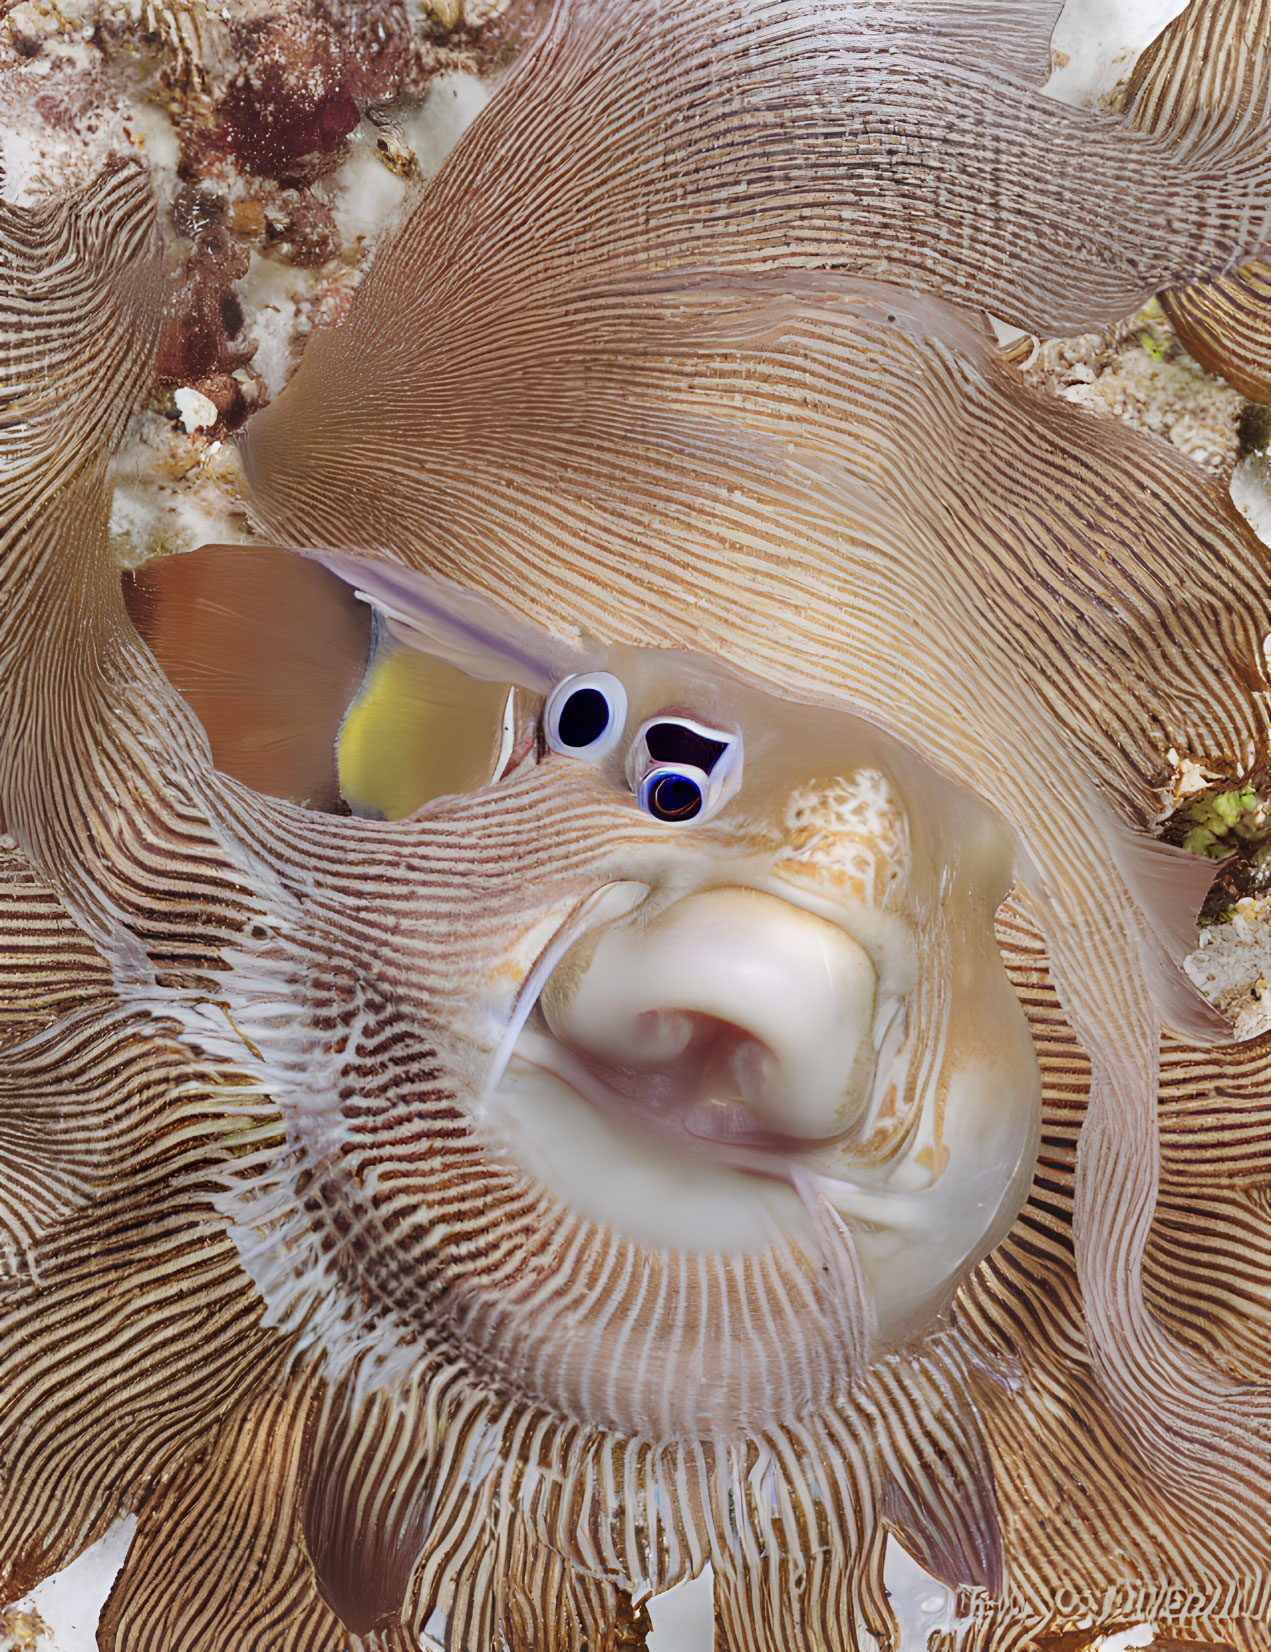 Porcelain Crab with Patterned Appendages on Sea Anemone Underwater